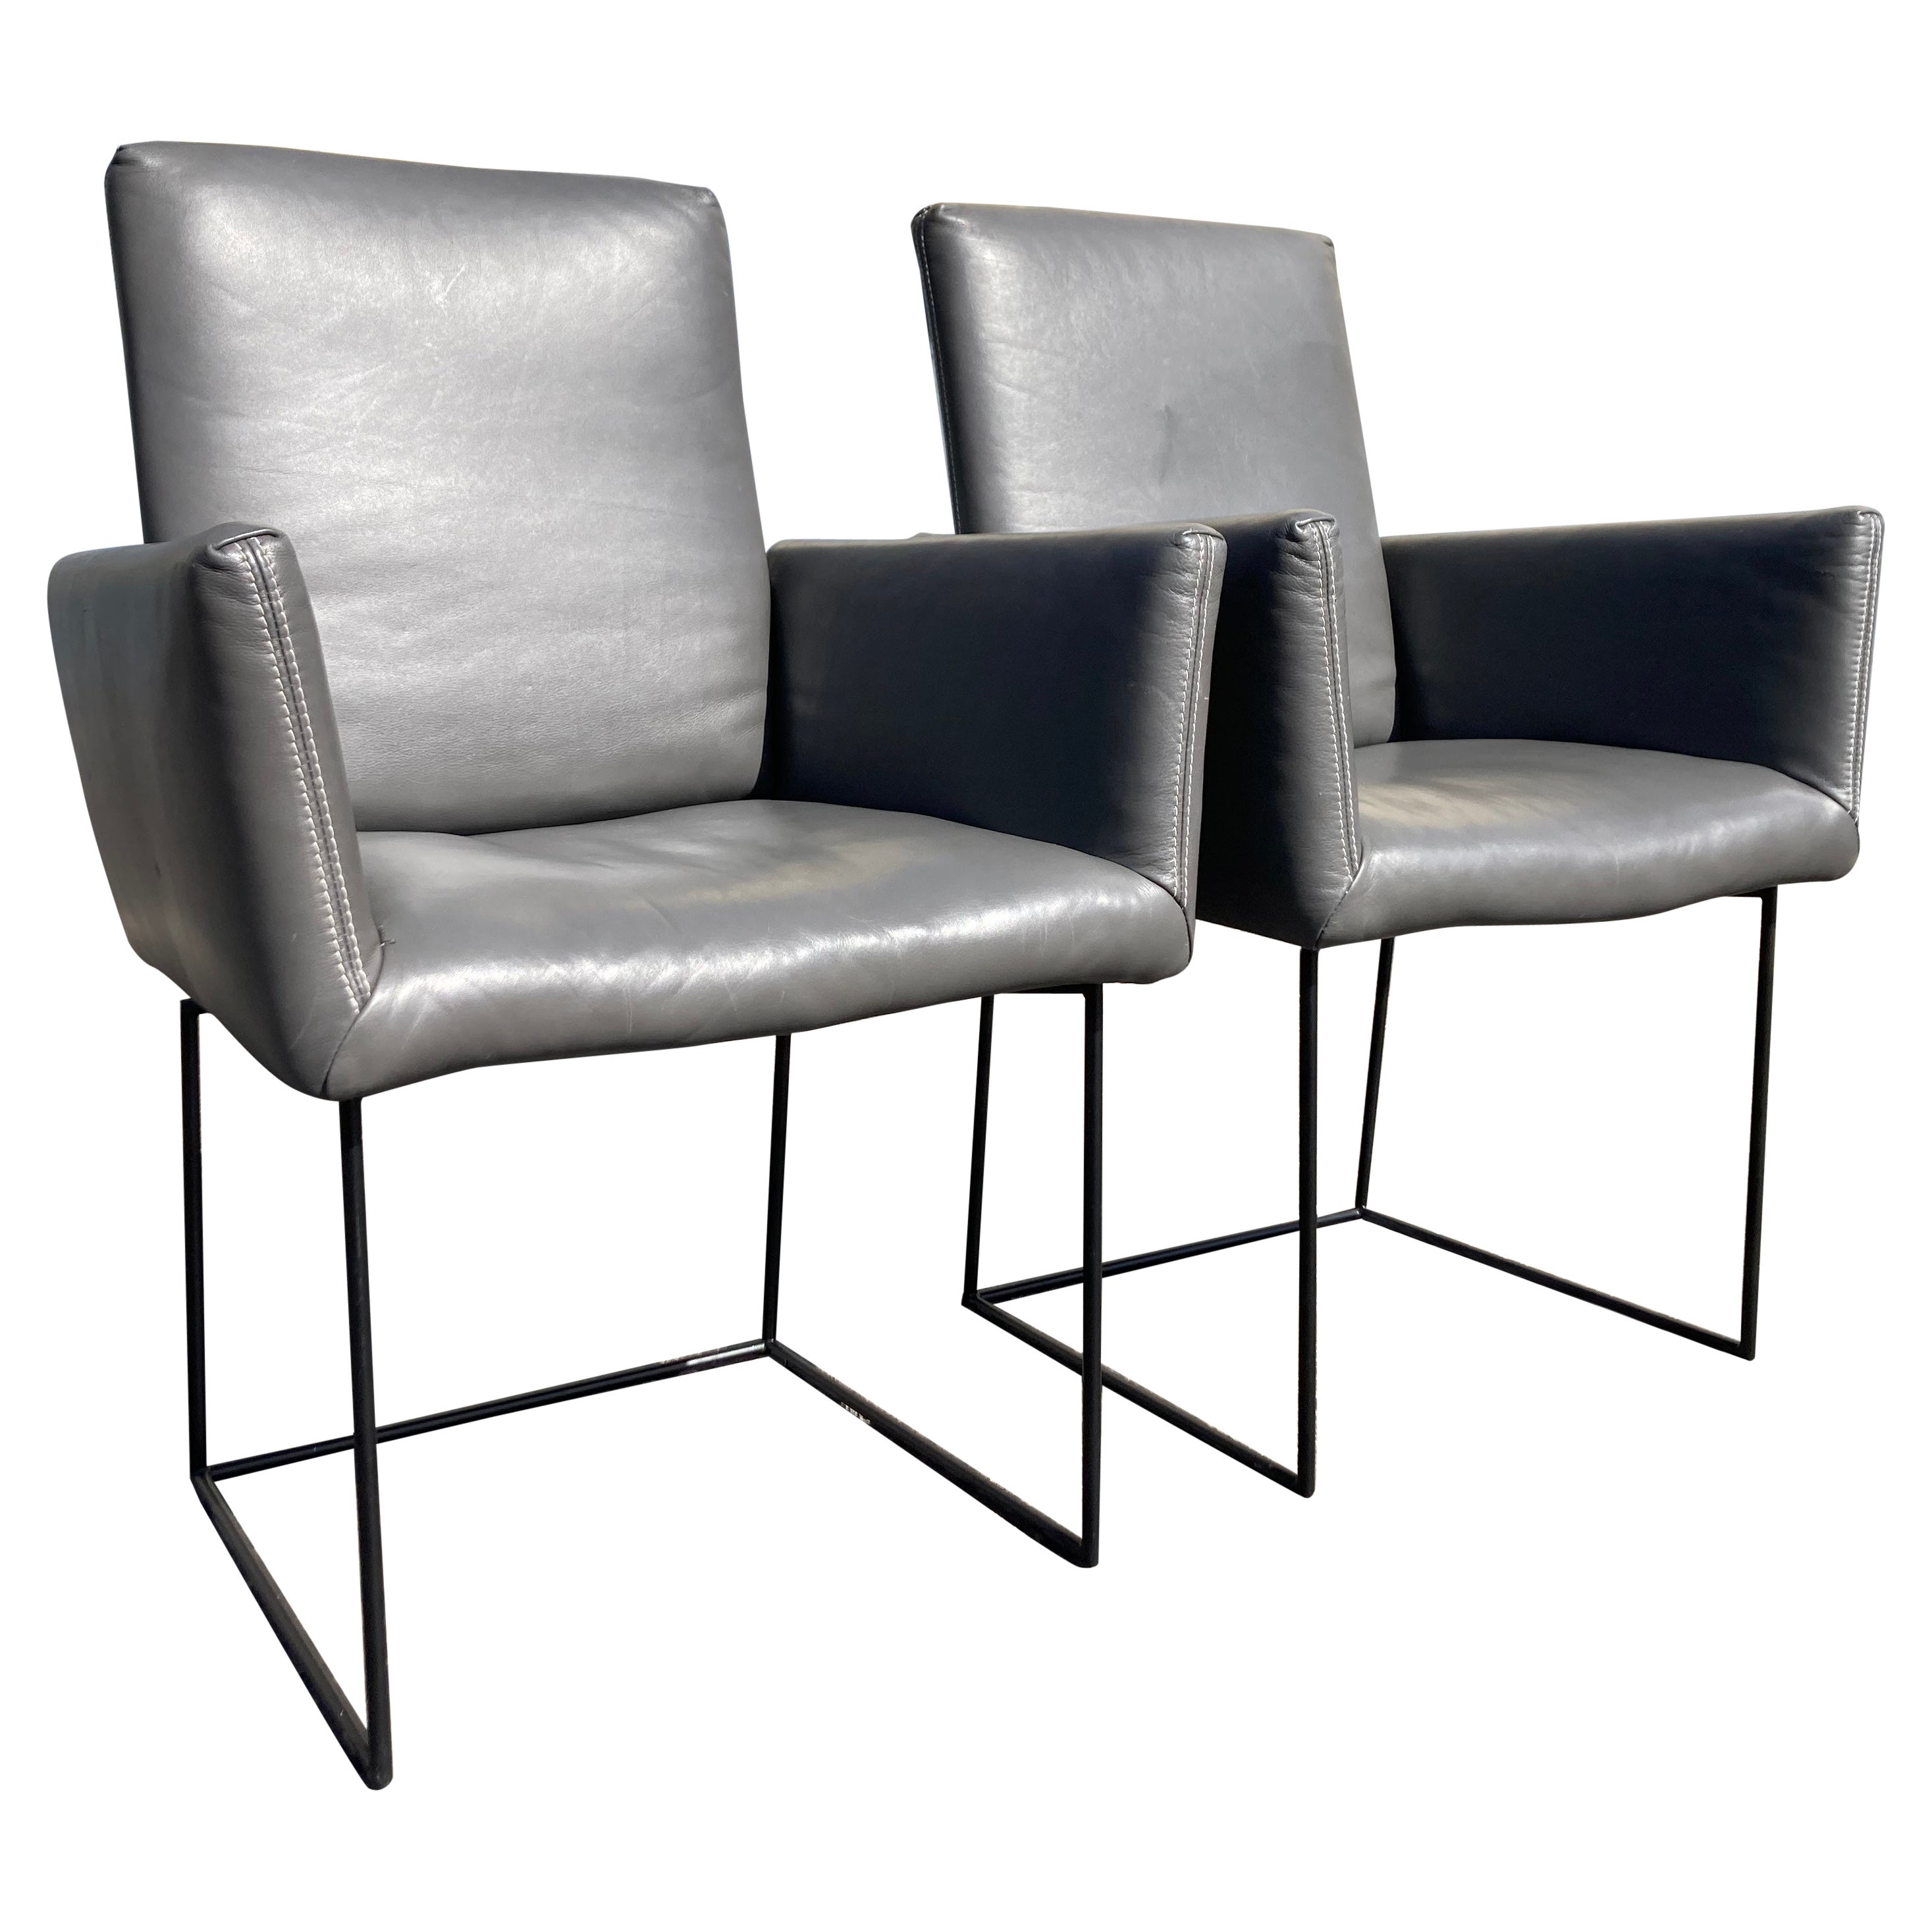 Pair Leather Arm Chairs Designed by KURT BEIER & KATI QUINGER for Bullfrog 